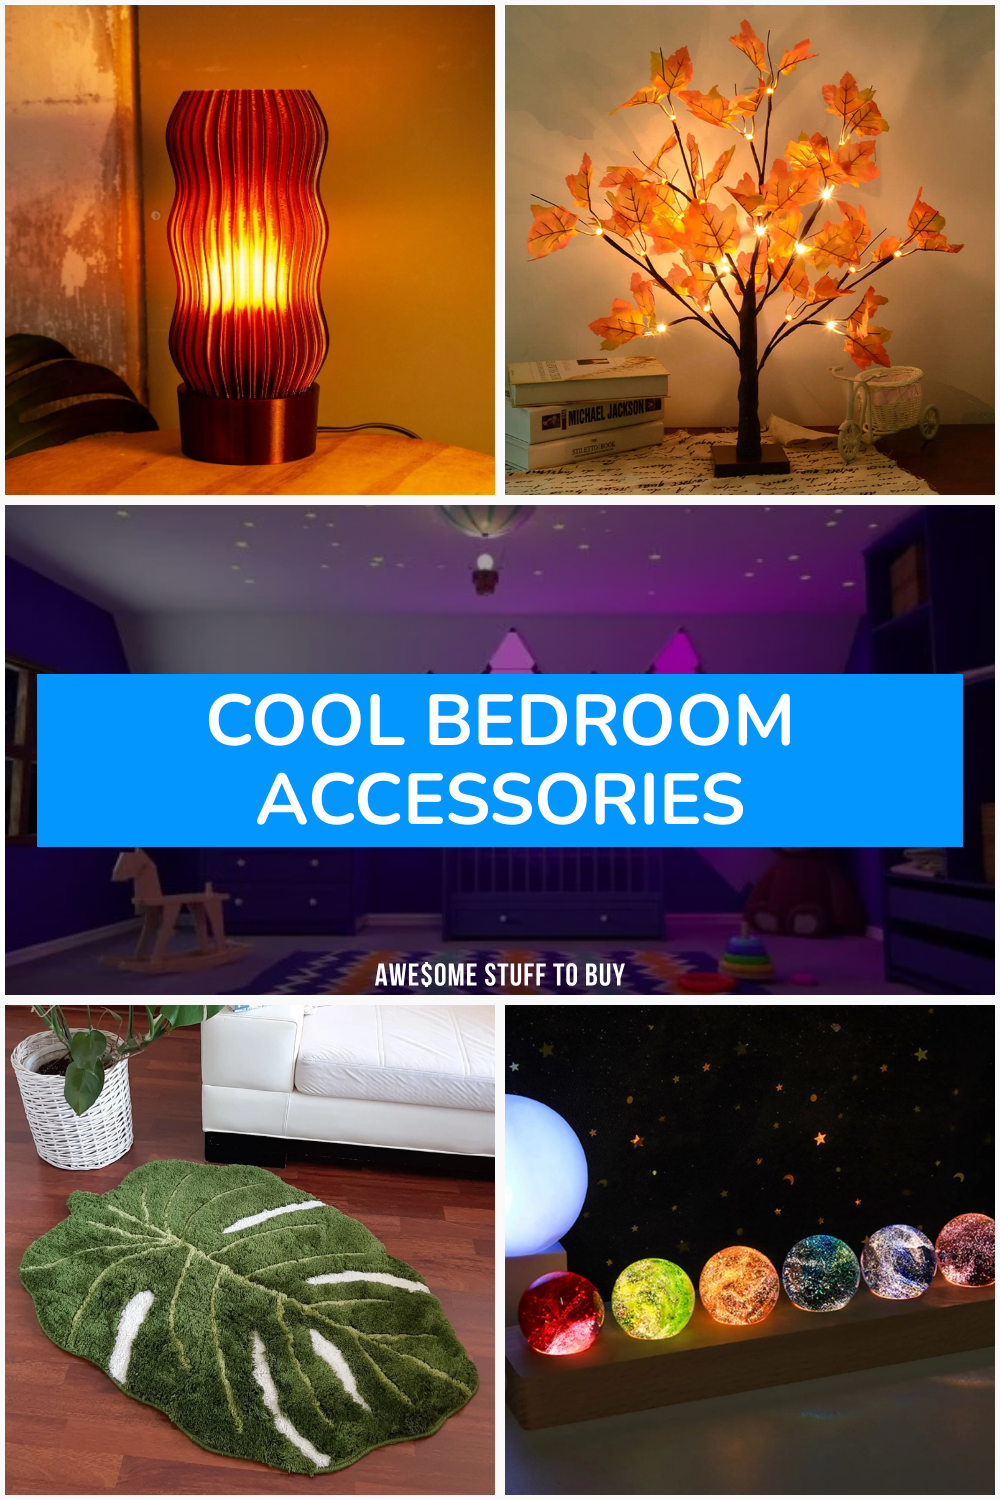 Cool Bedroom Accessories // Awesome Stuff to Buy